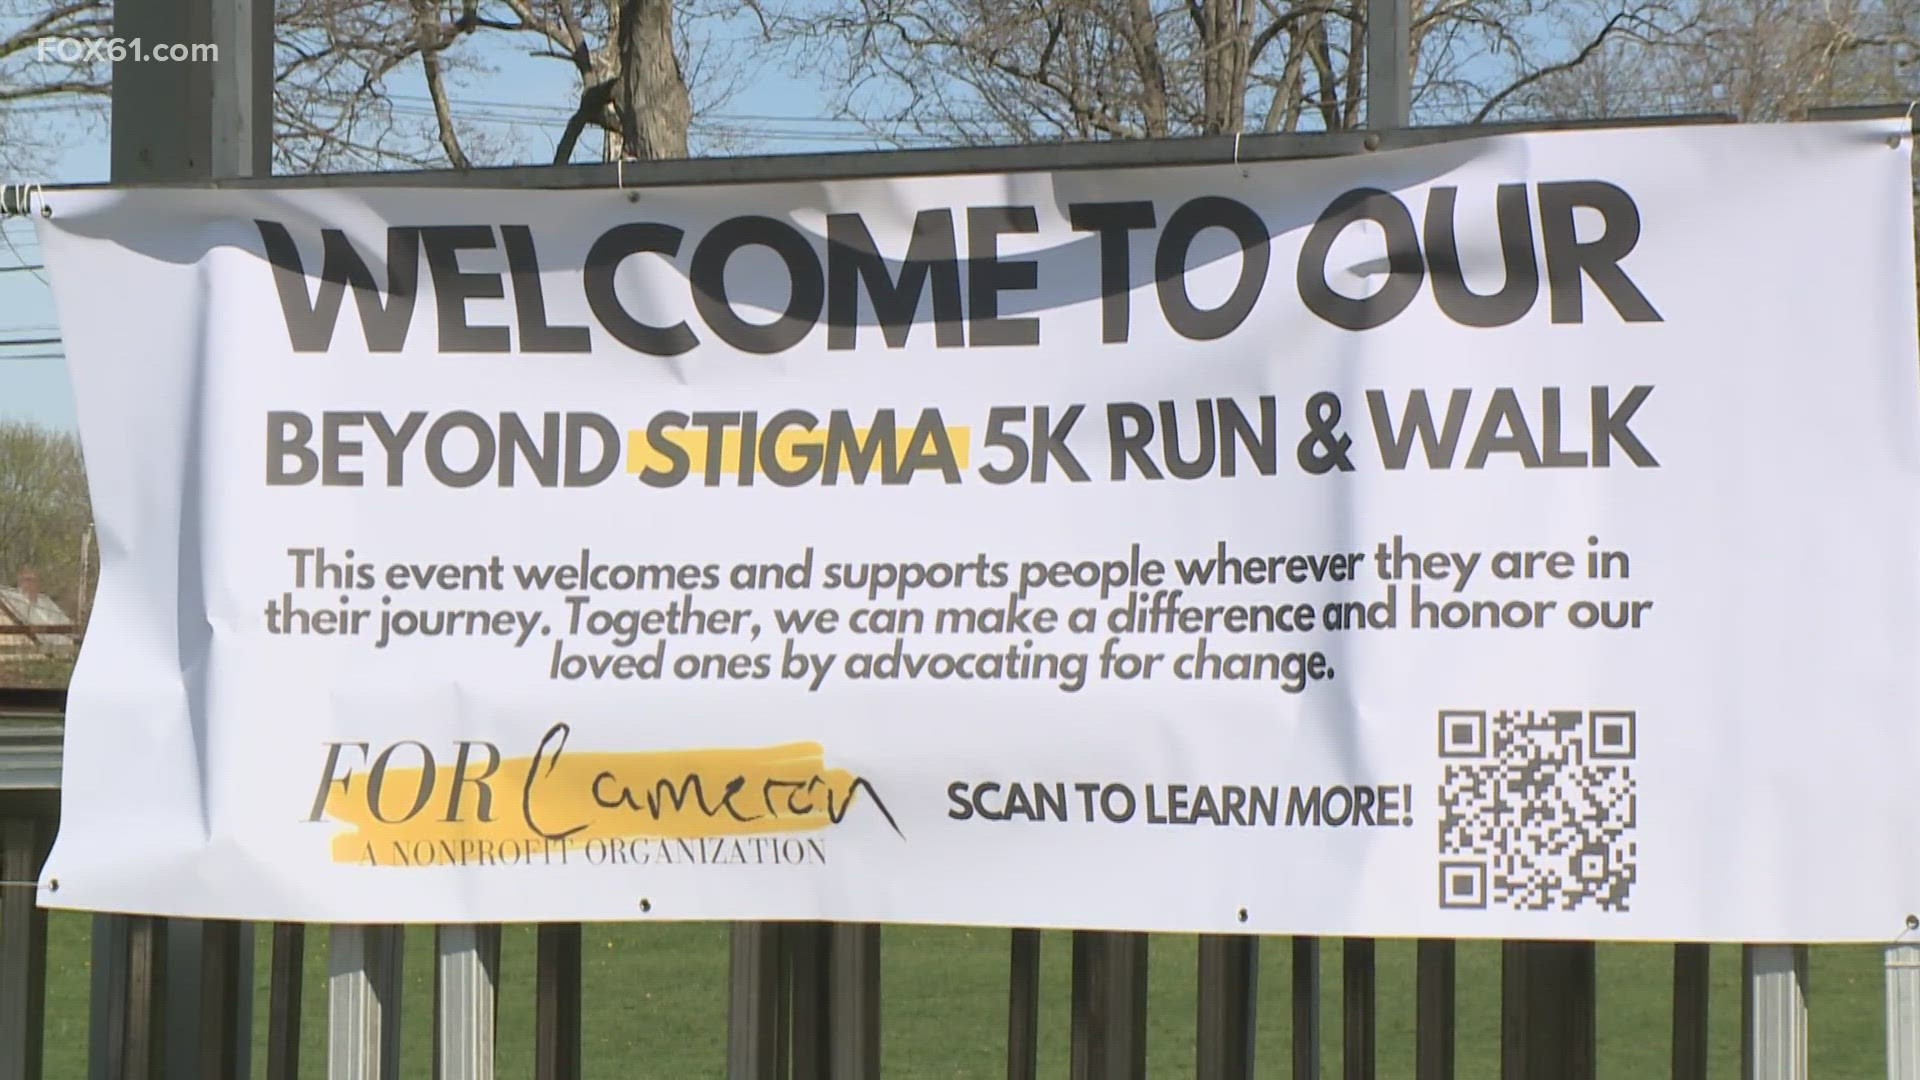 The walk, held on April 13, was held to raise awareness for people who suffer drug abuse and getting rid of the stigma surround it.